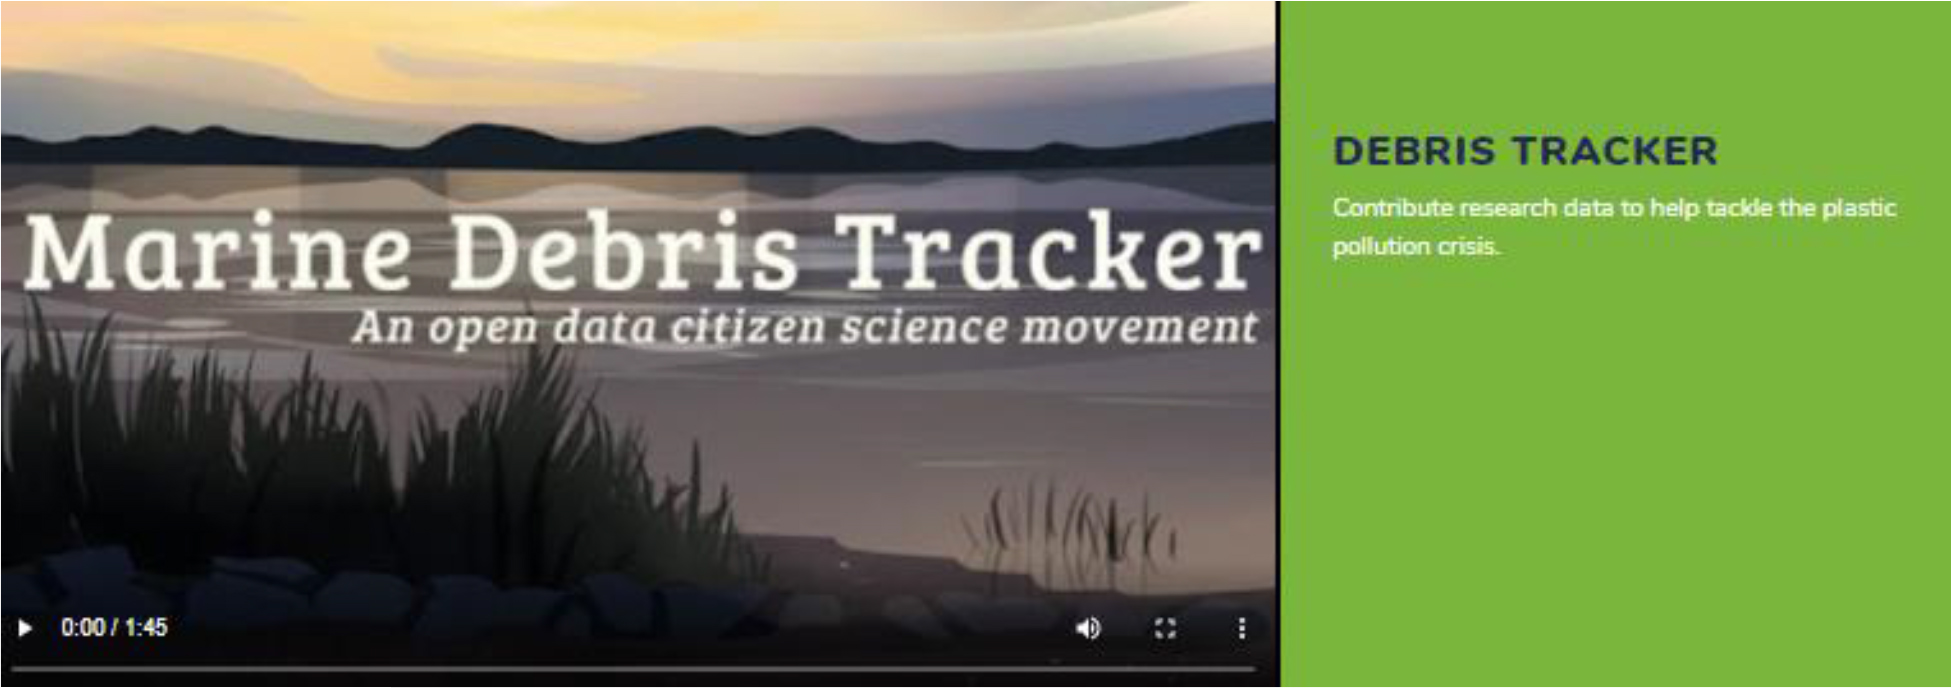 The Debris Tracker Education Page on SciStarter provides an introductory project video along with a step-by-step guide to get started engaging with the project